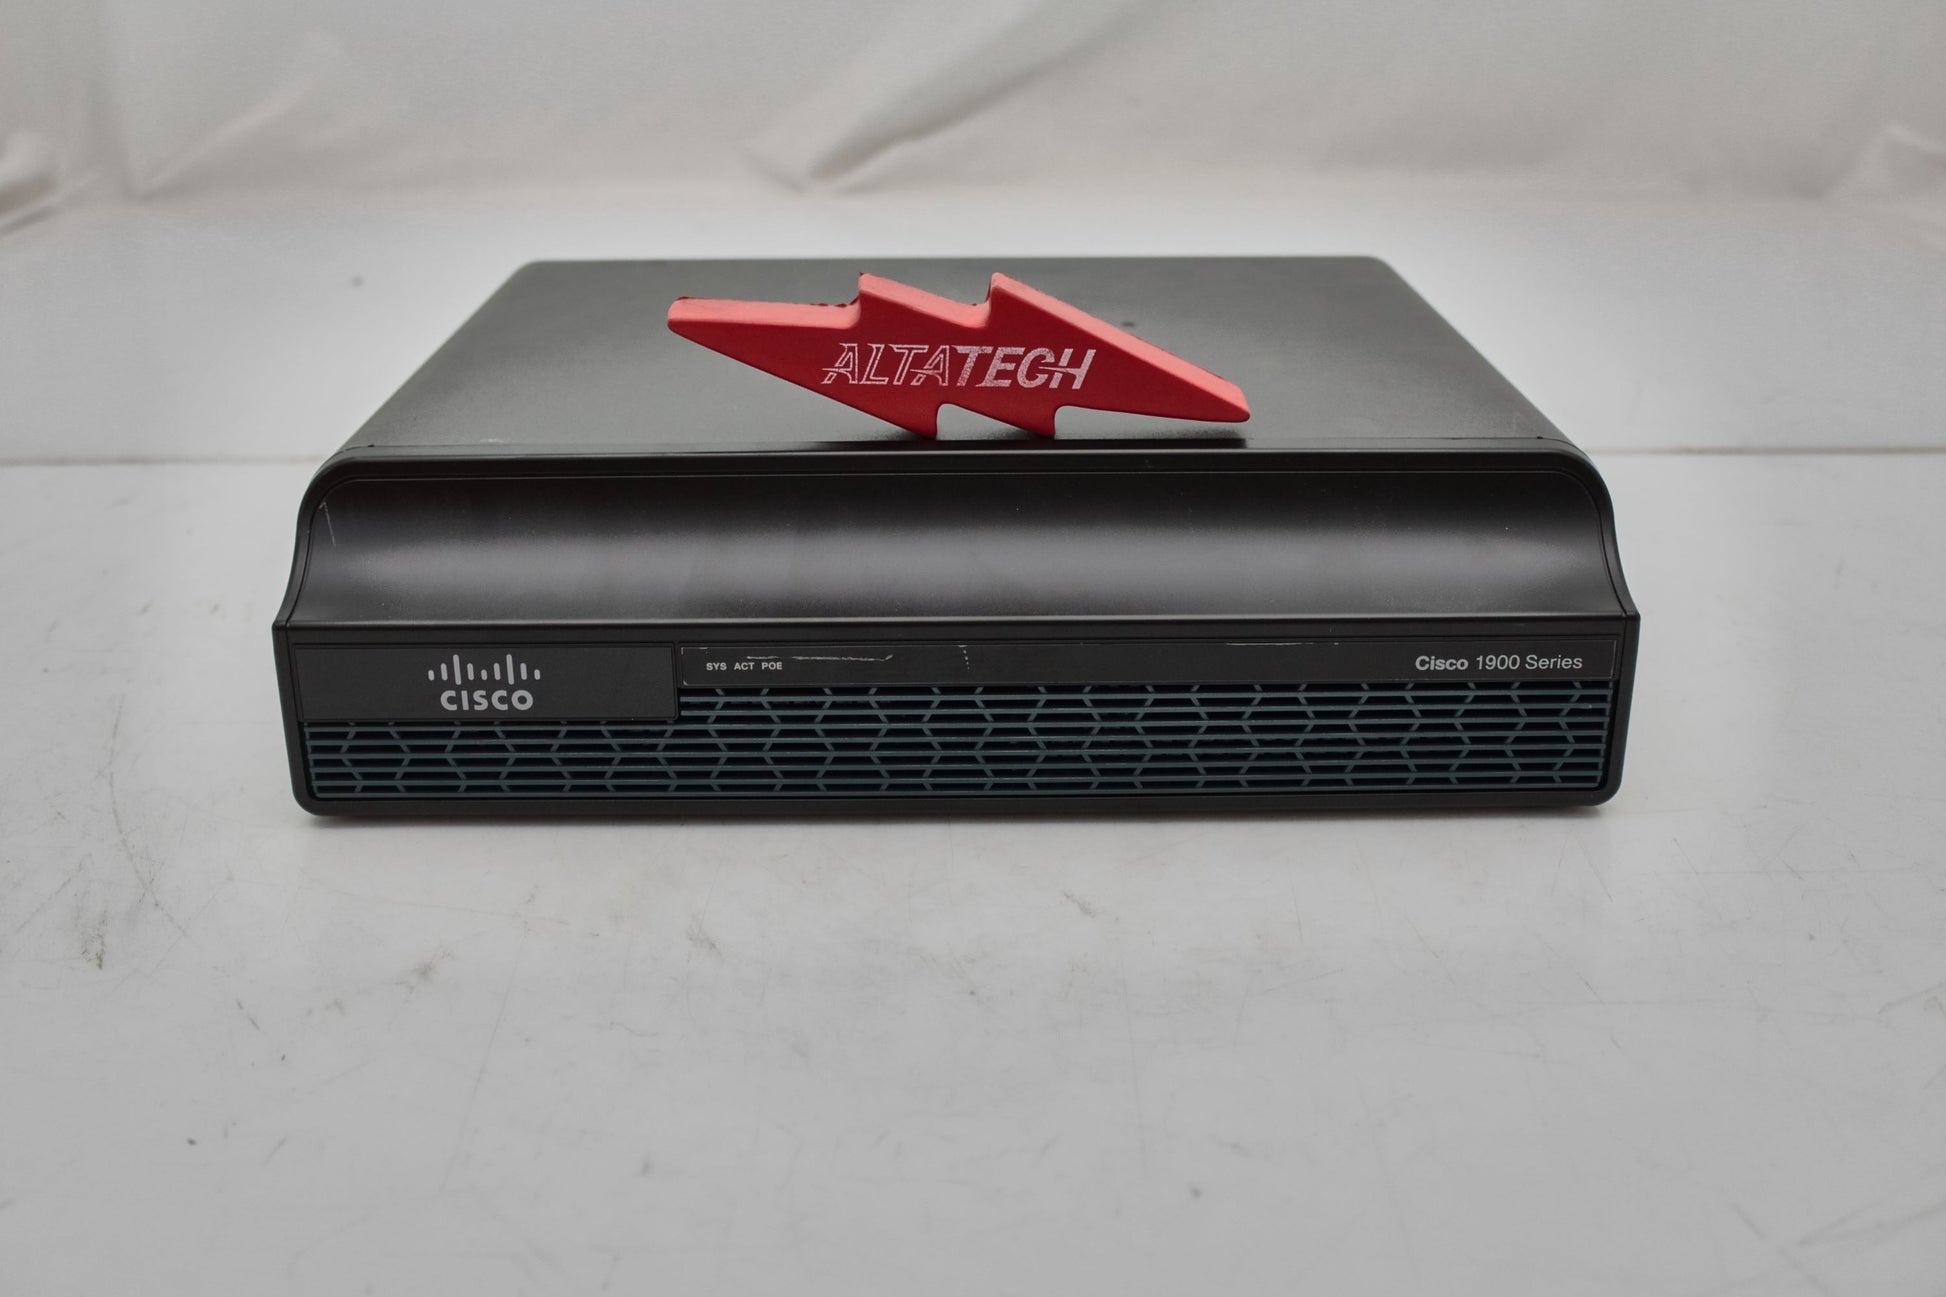 Cisco Cisco1941/K9 2 Port Integrated Service Router, Used